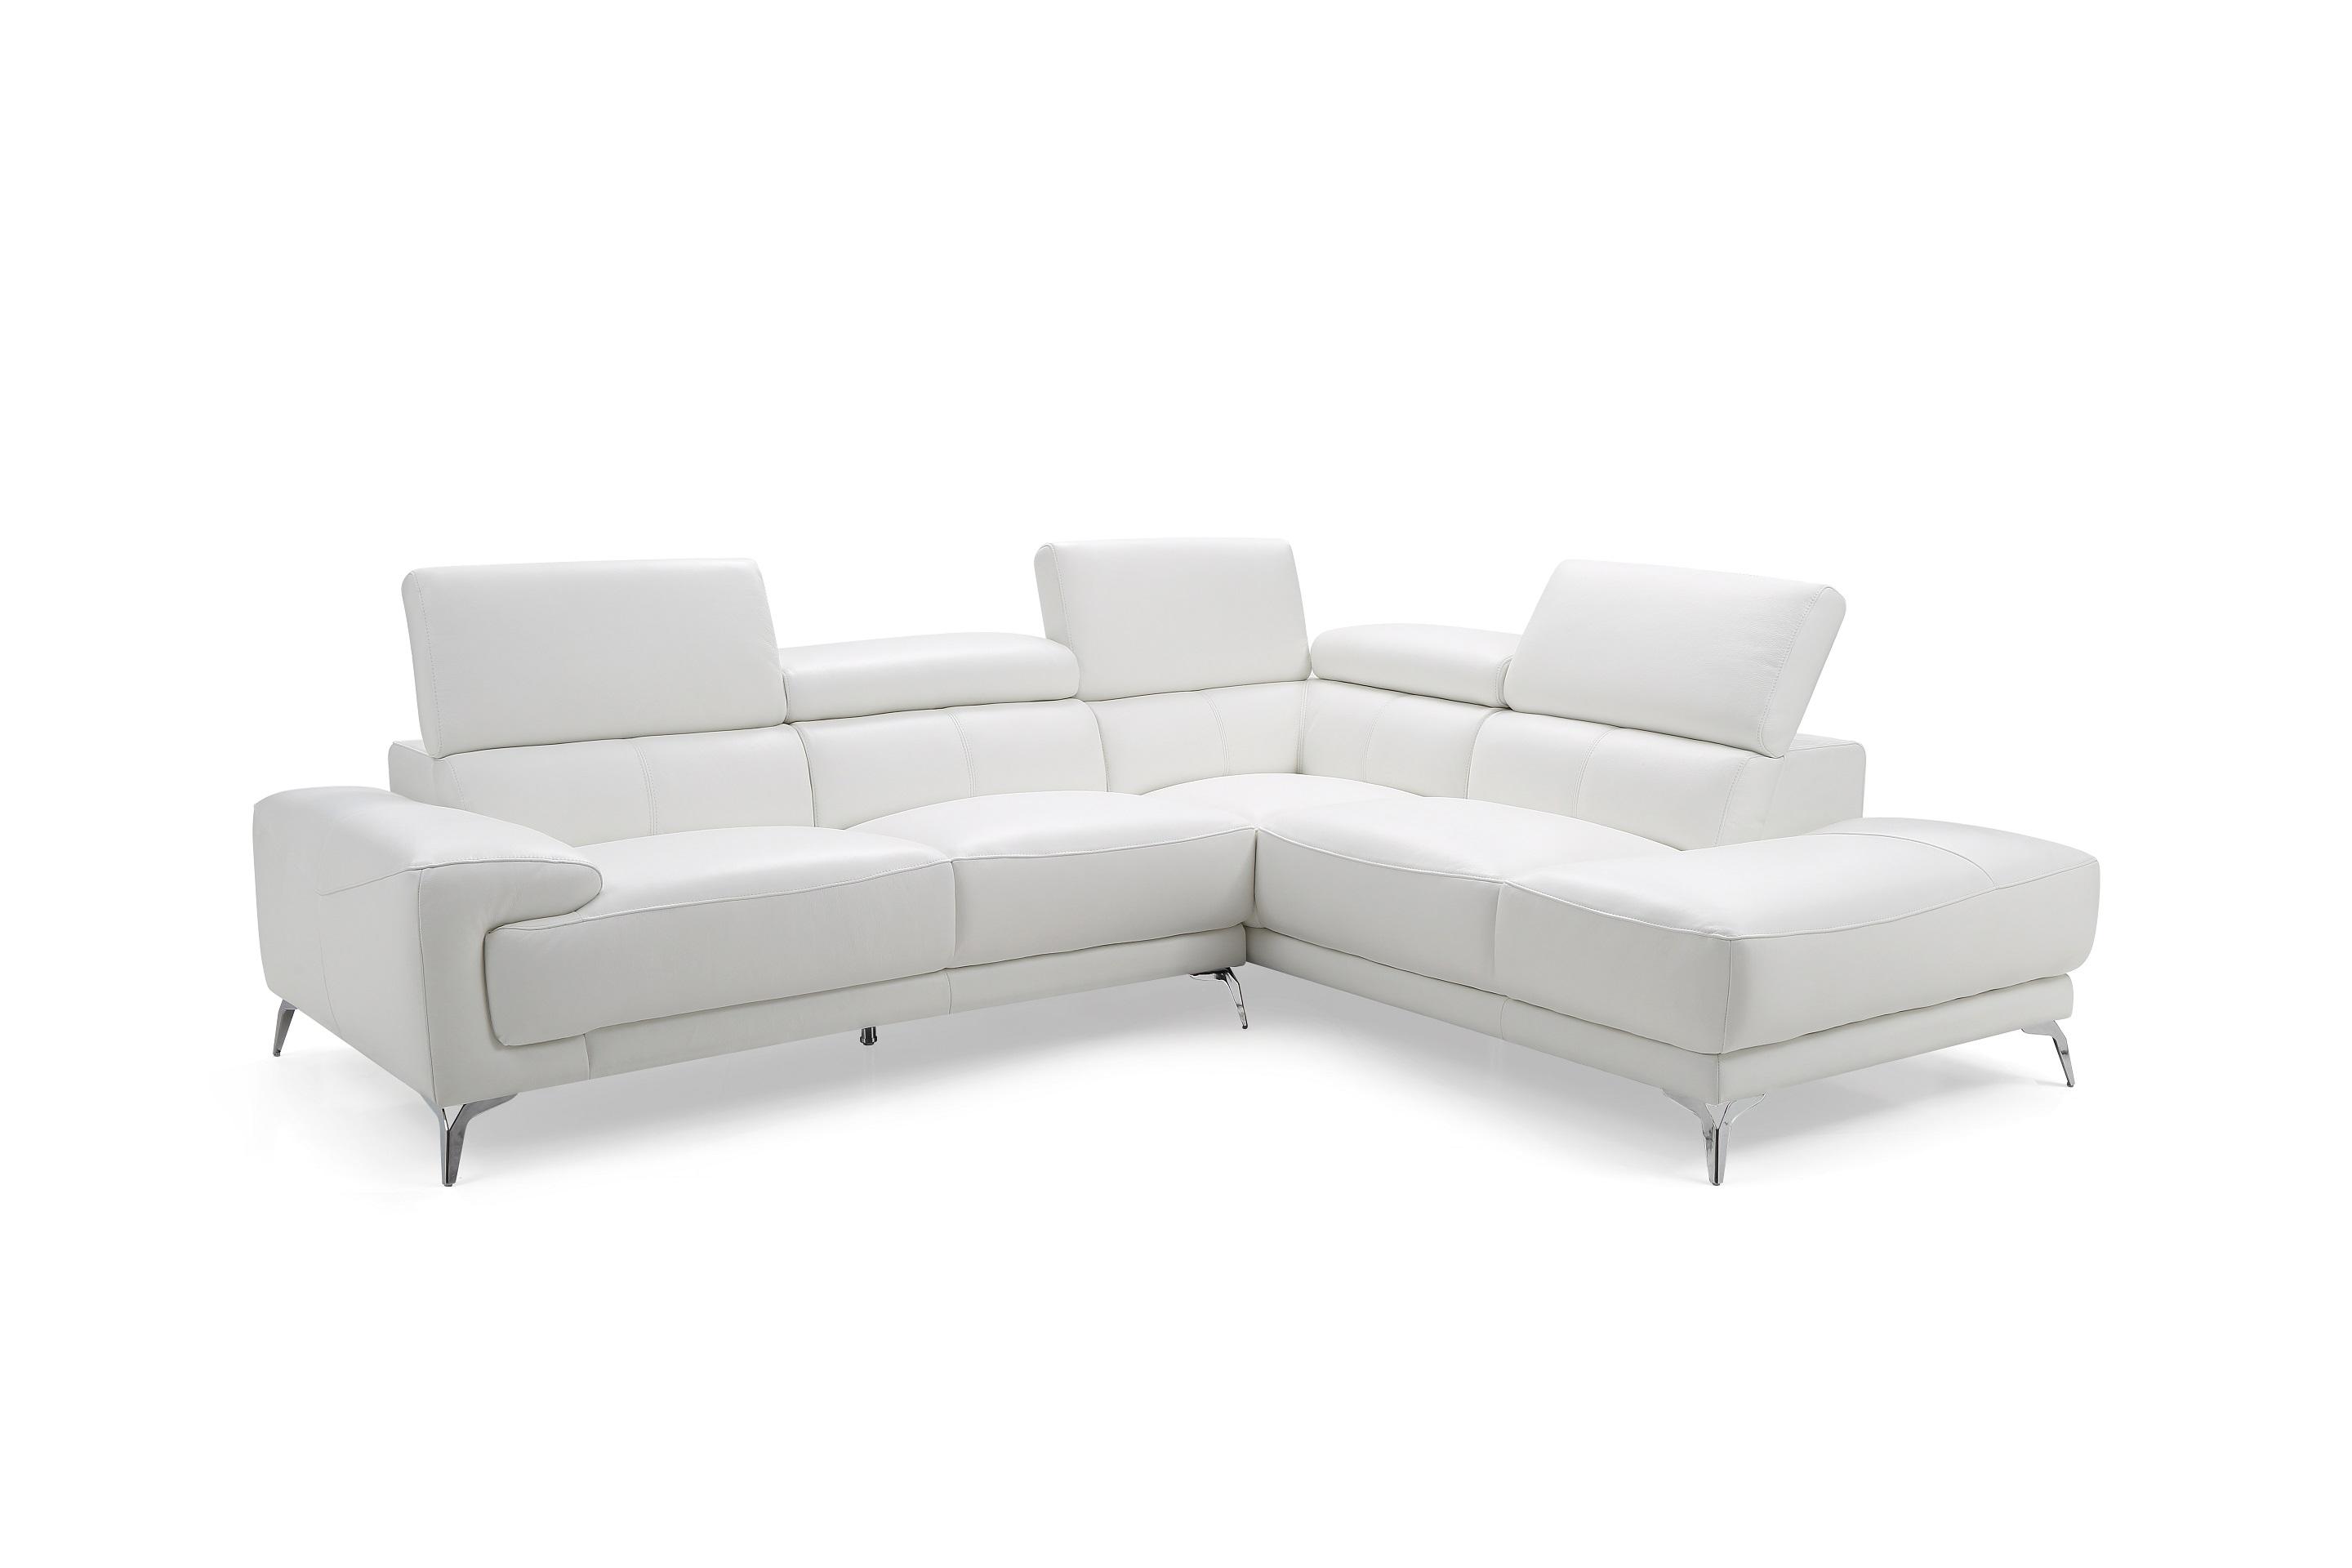 

    
Contemporary White Top Grain Leather RSF Sectional WhiteLine SR1467LS-WHT Fabiola
